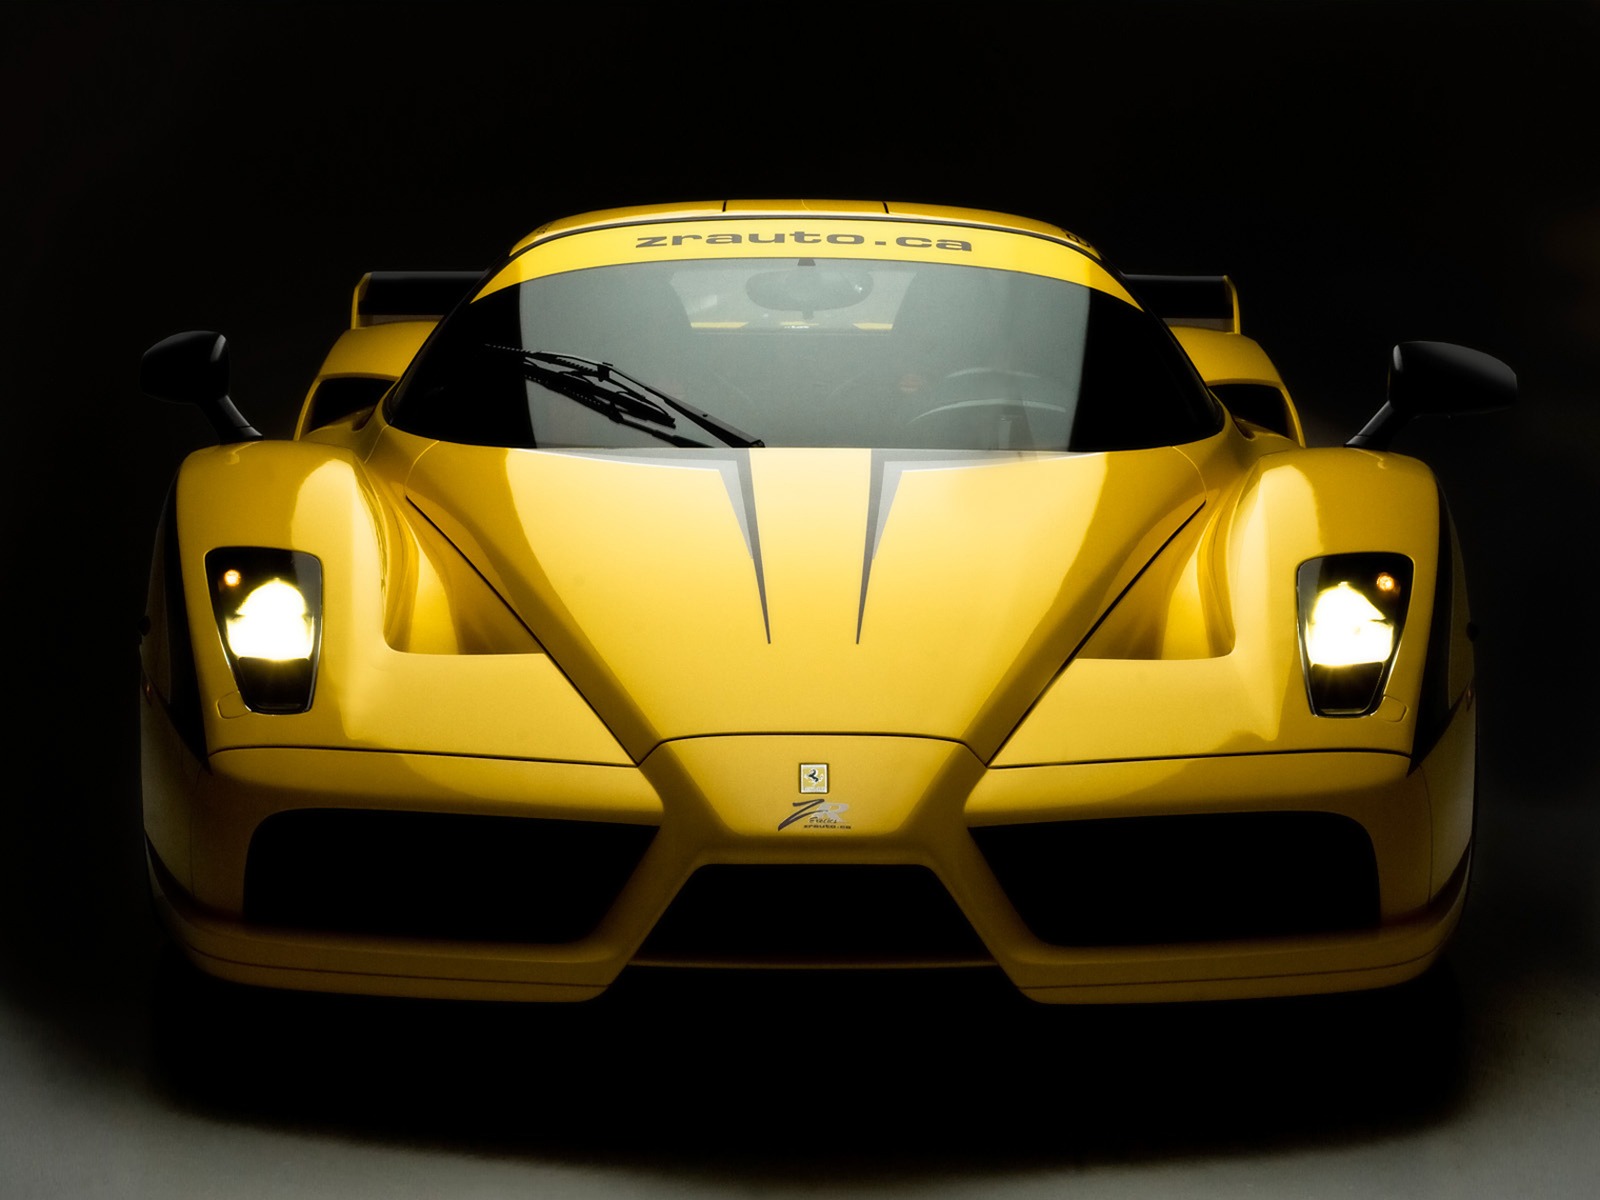 1024 768 - High Resolution Images Cars , HD Wallpaper & Backgrounds